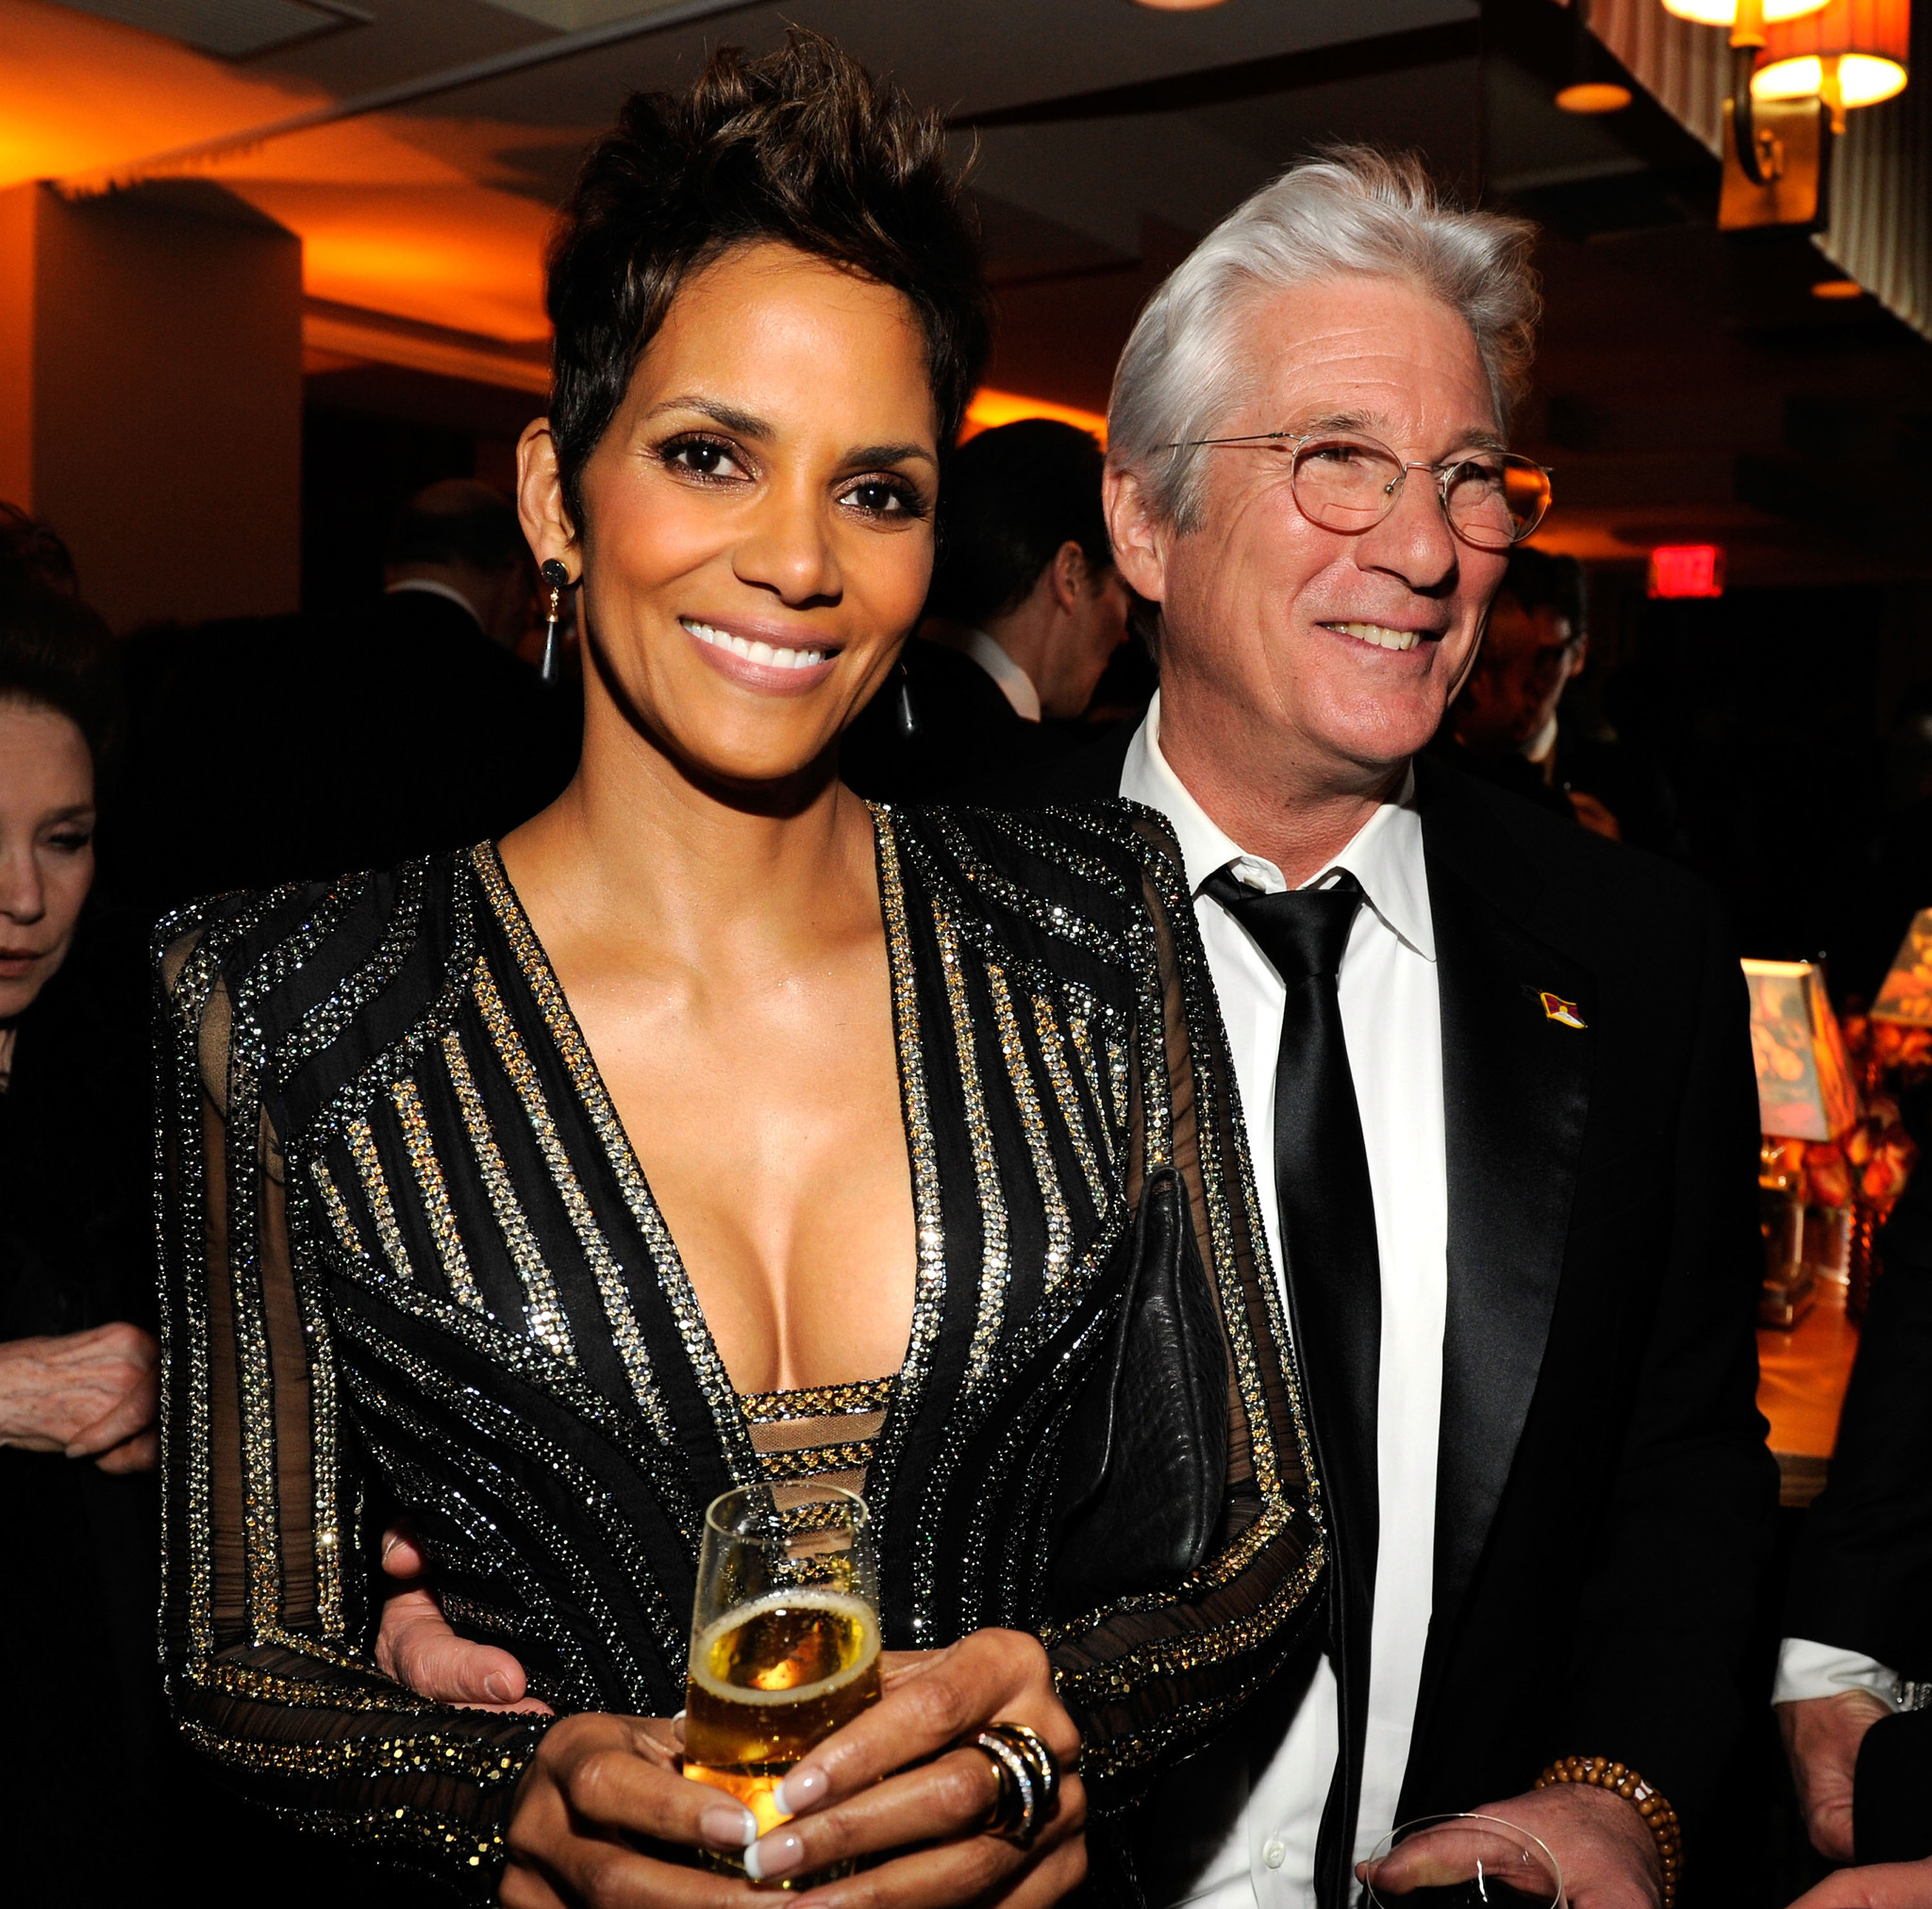 Richard Gere and Halle Berry